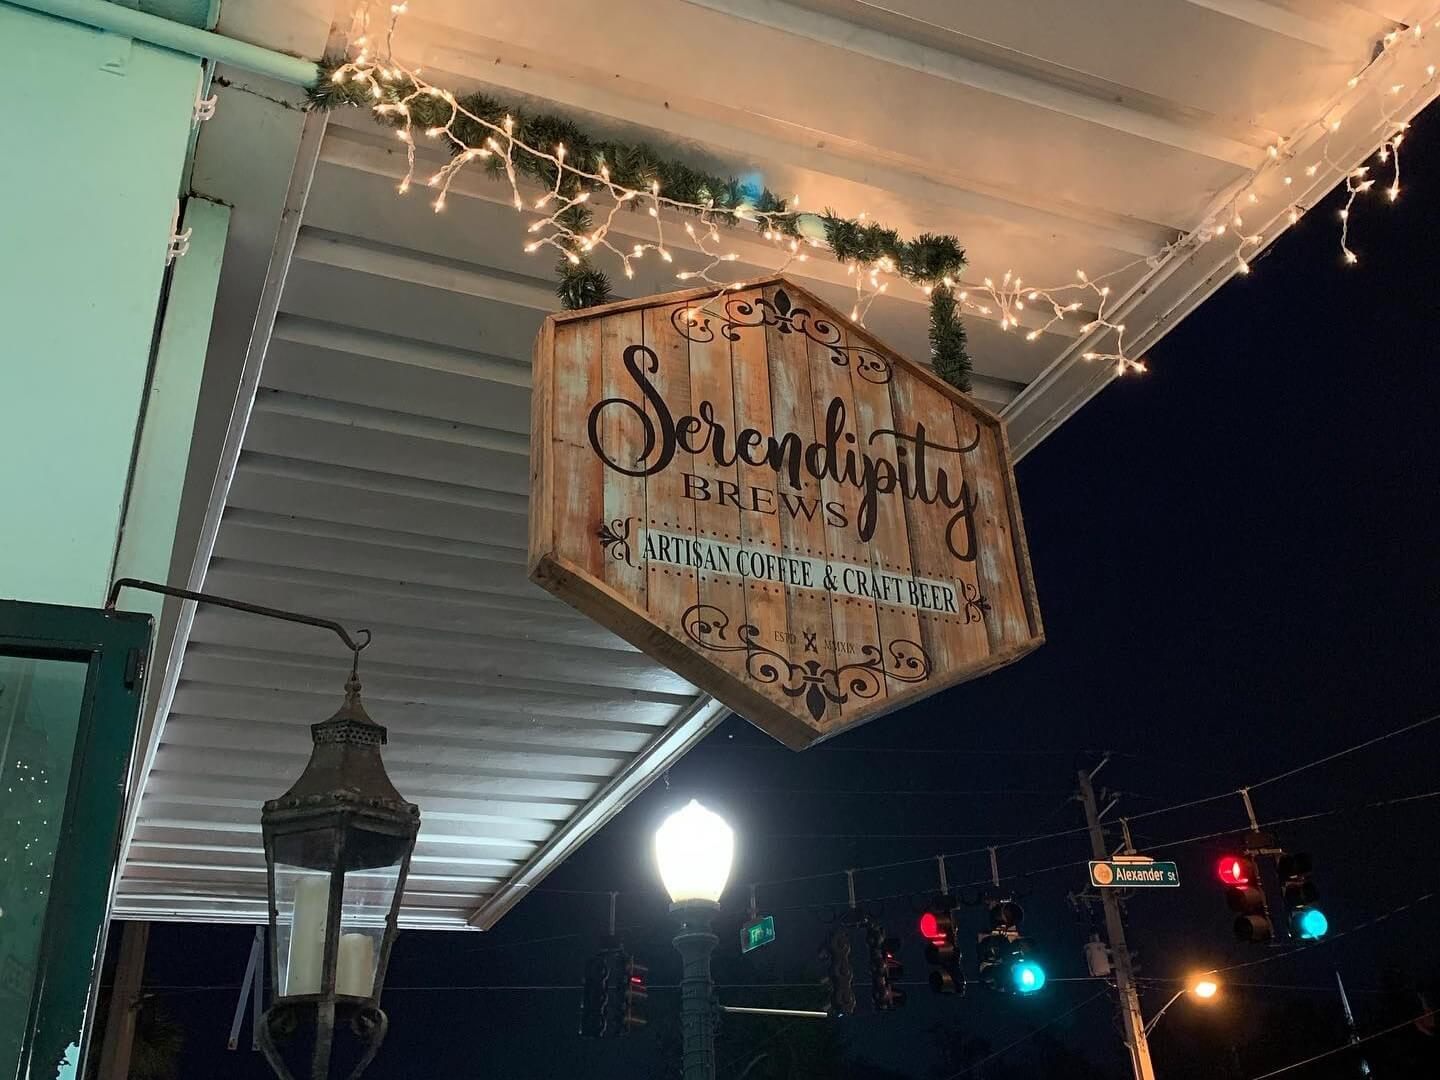 Photo of outdoor sign at Serendipity Brews.